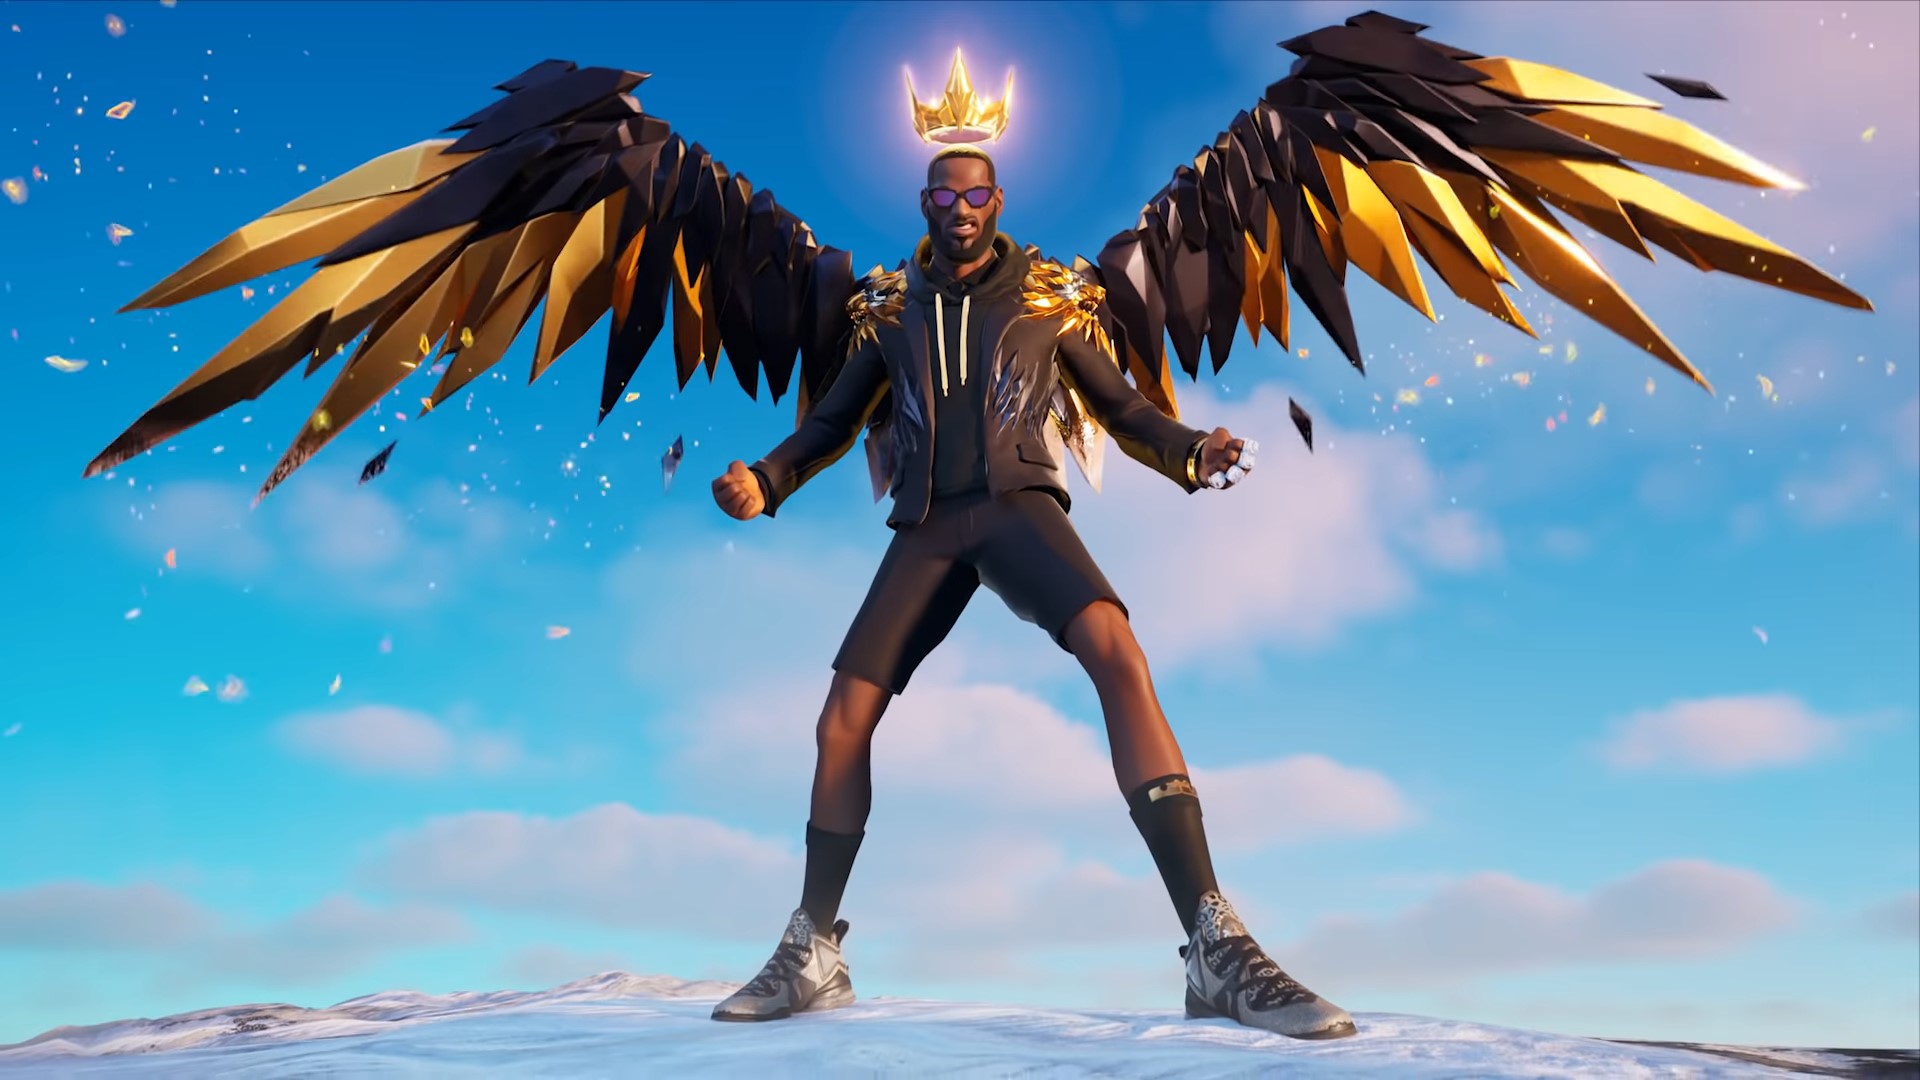 How To Get New Cloud Striker Skin Celebration Pack NOW FREE In Fortnite! -  Free Celebration Pack! 